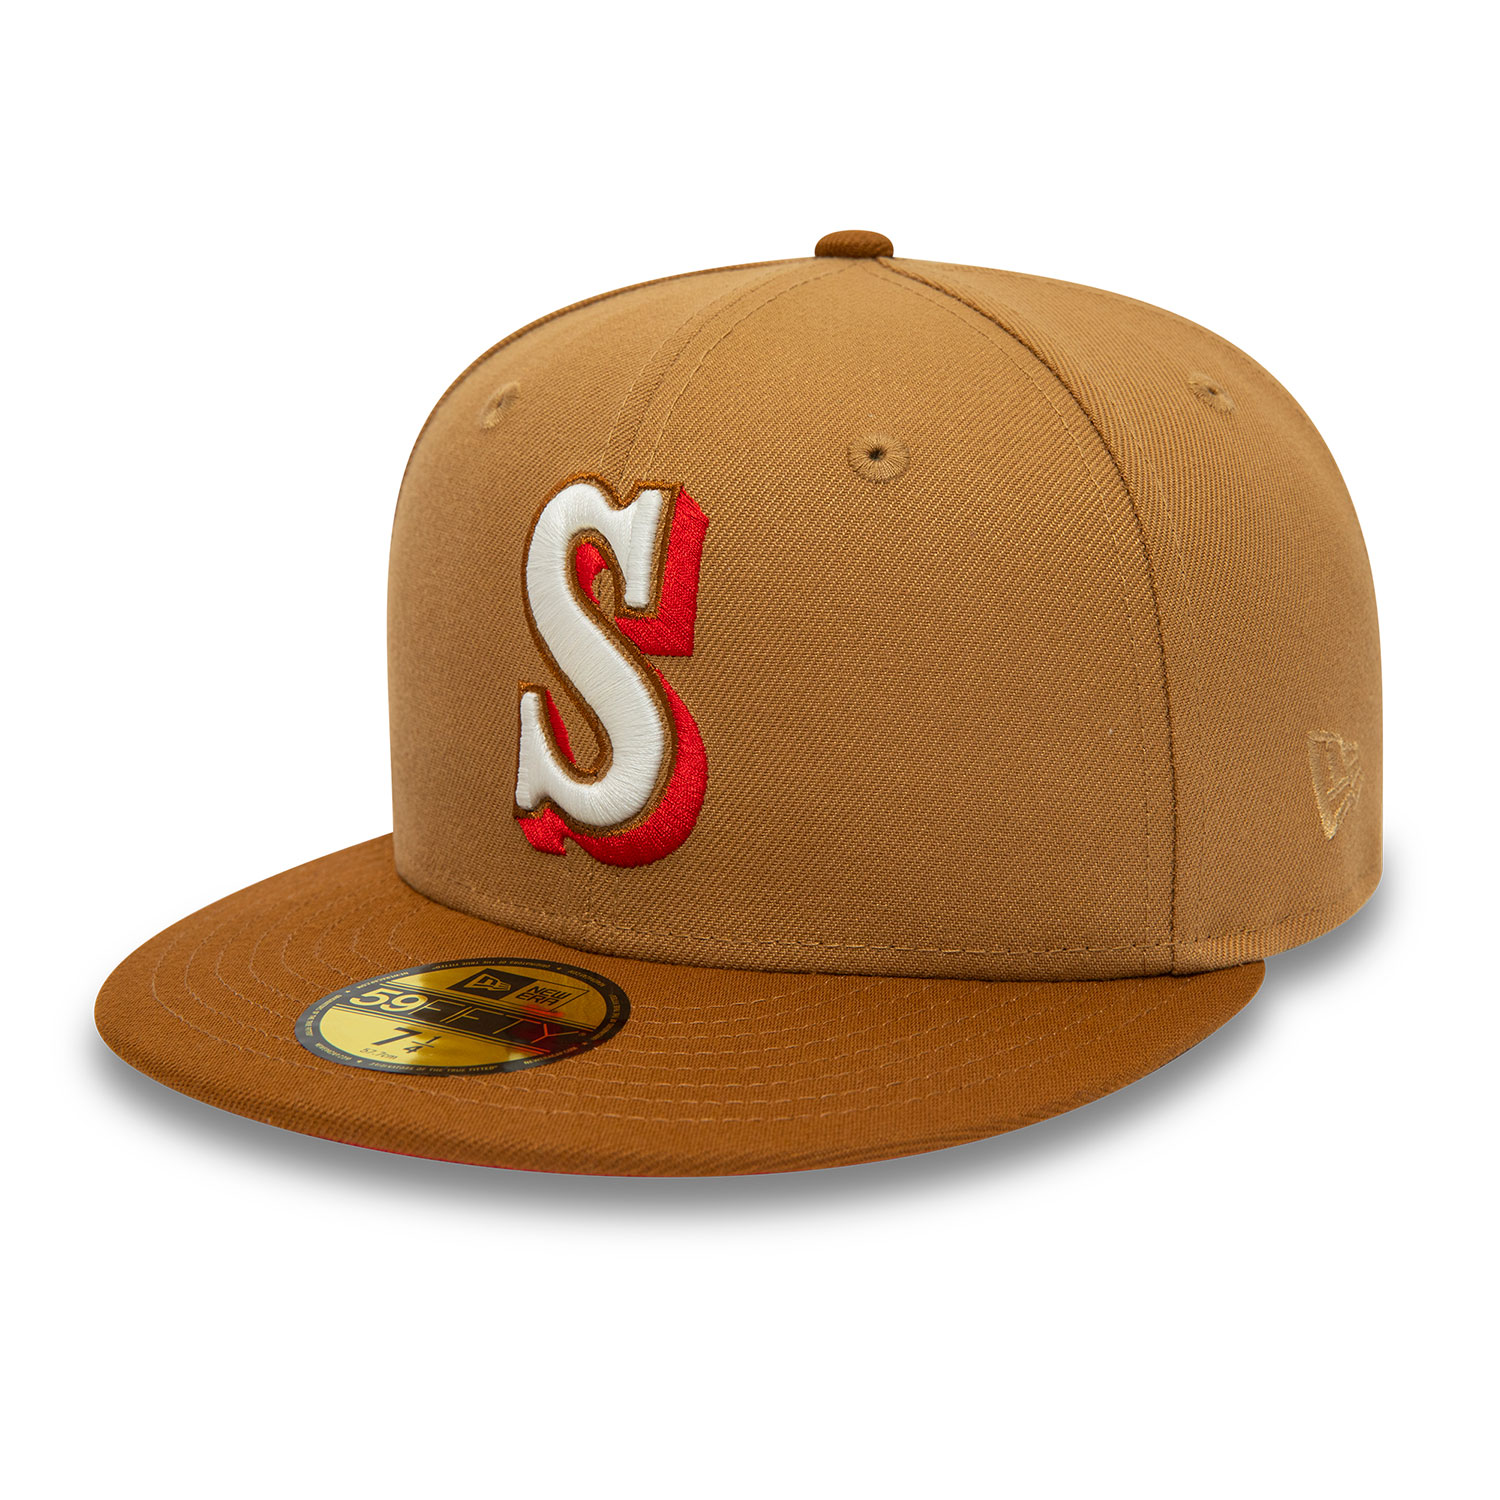 Lids Seattle Mariners New Era 40th Team Anniversary 59FIFTY Fitted Hat -  White/Brown